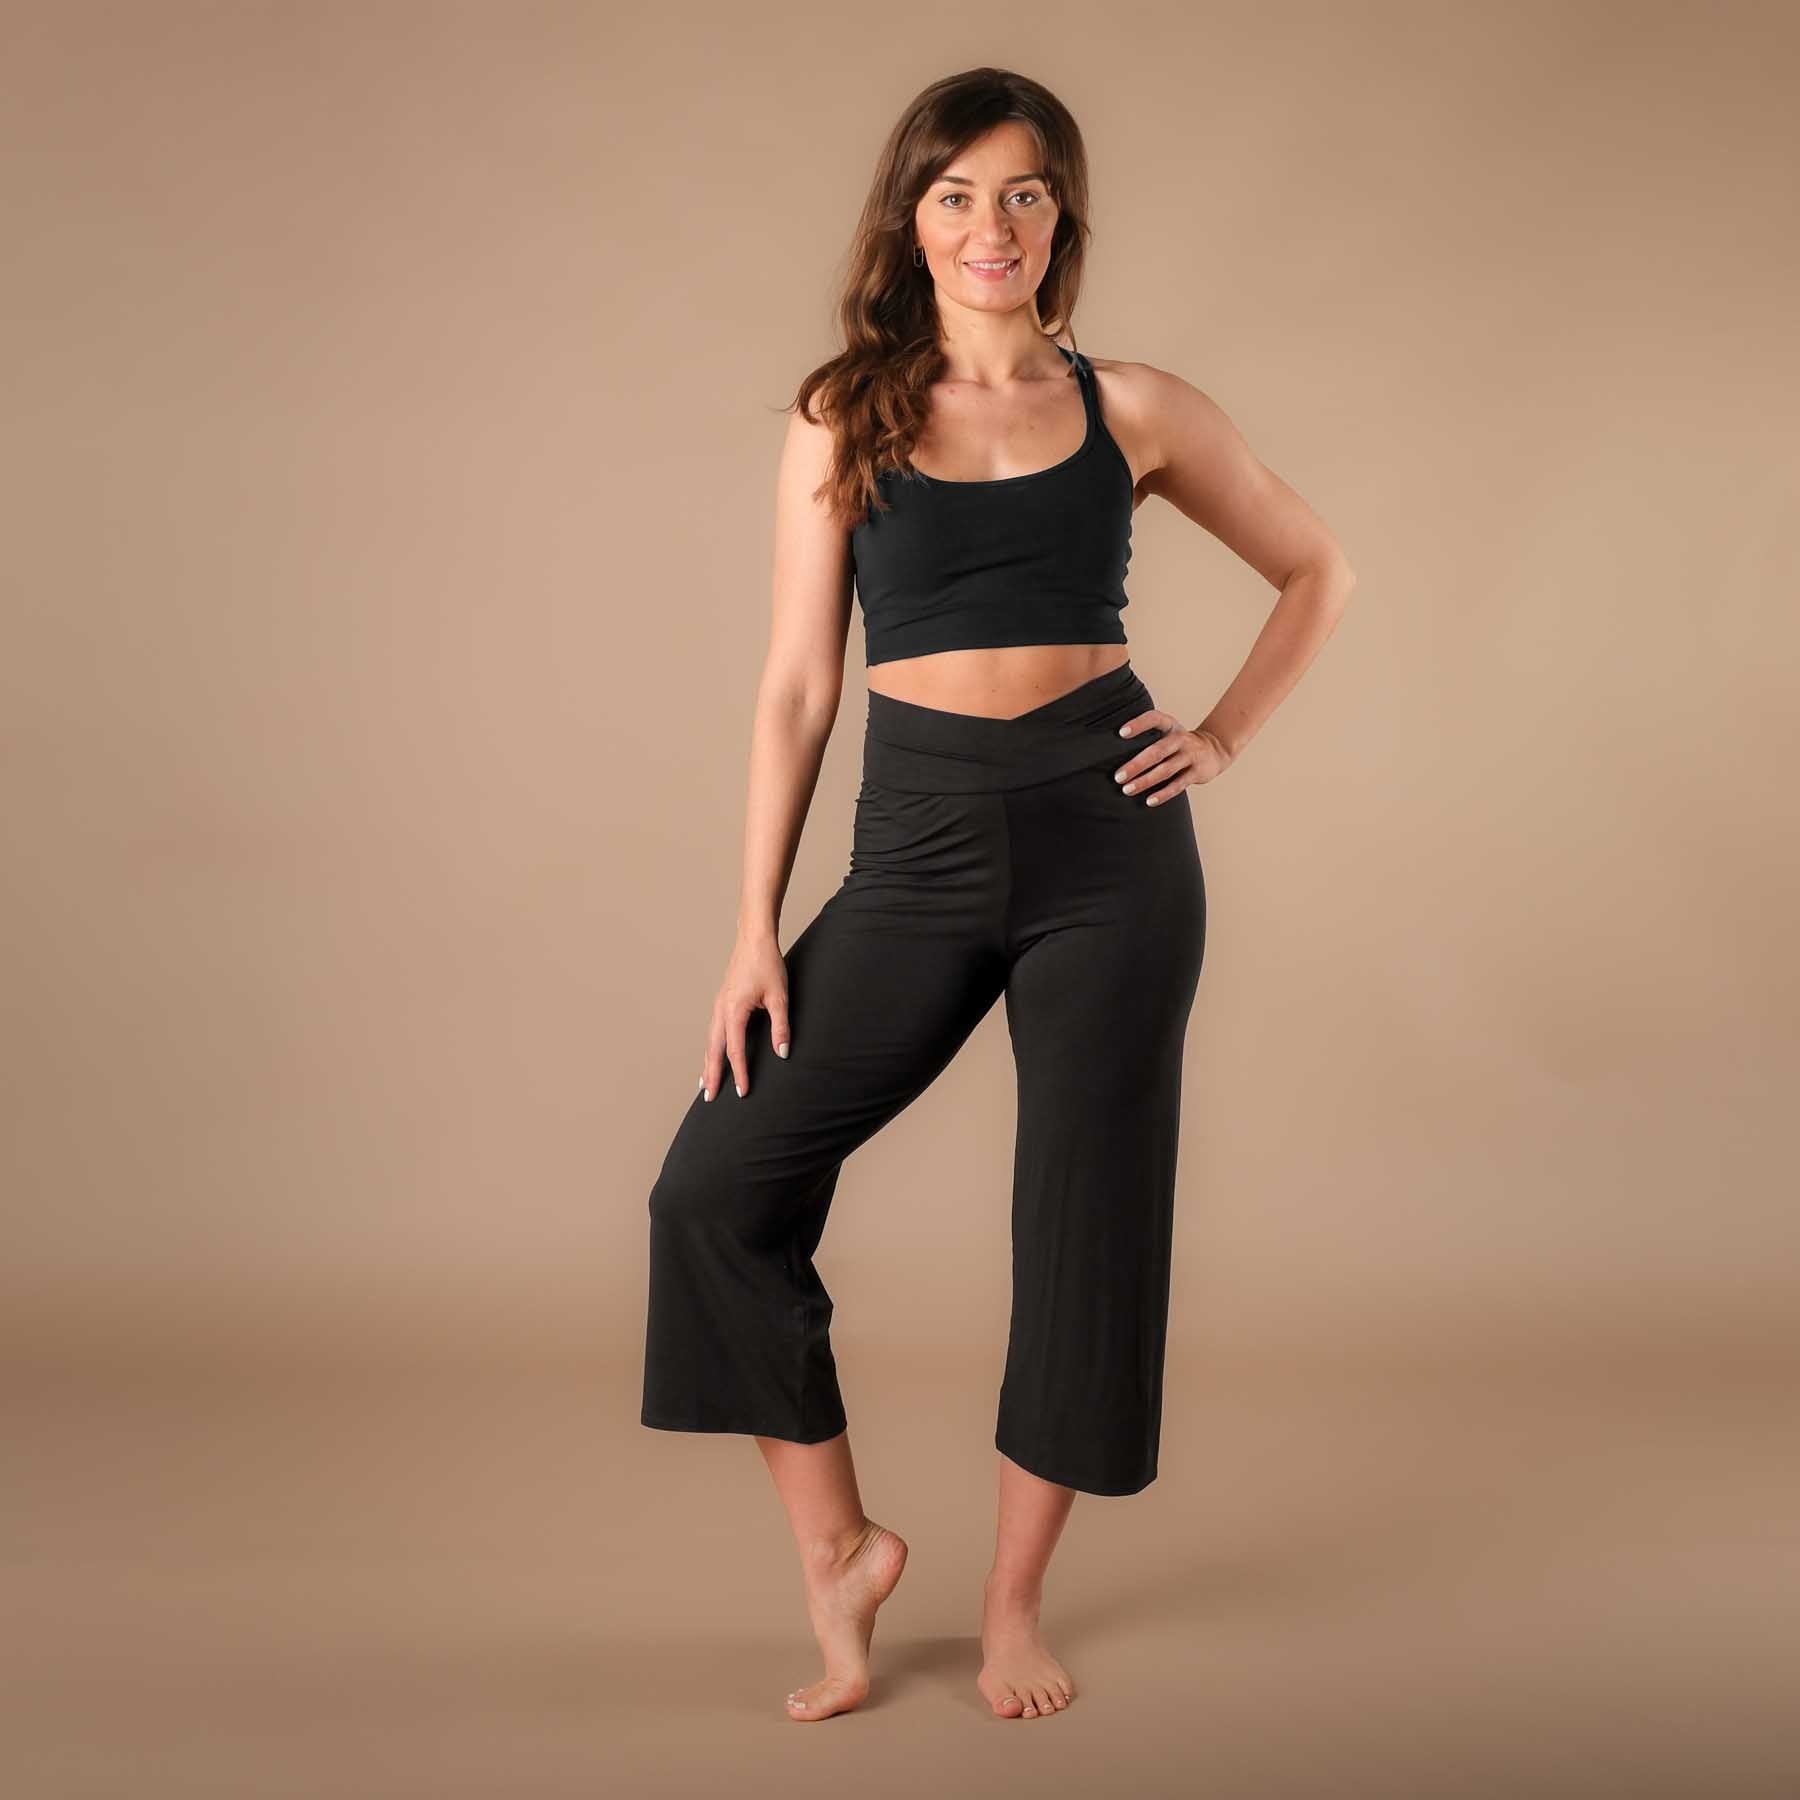 Yoga Sommer Outfit Culotte Comfy schwarz